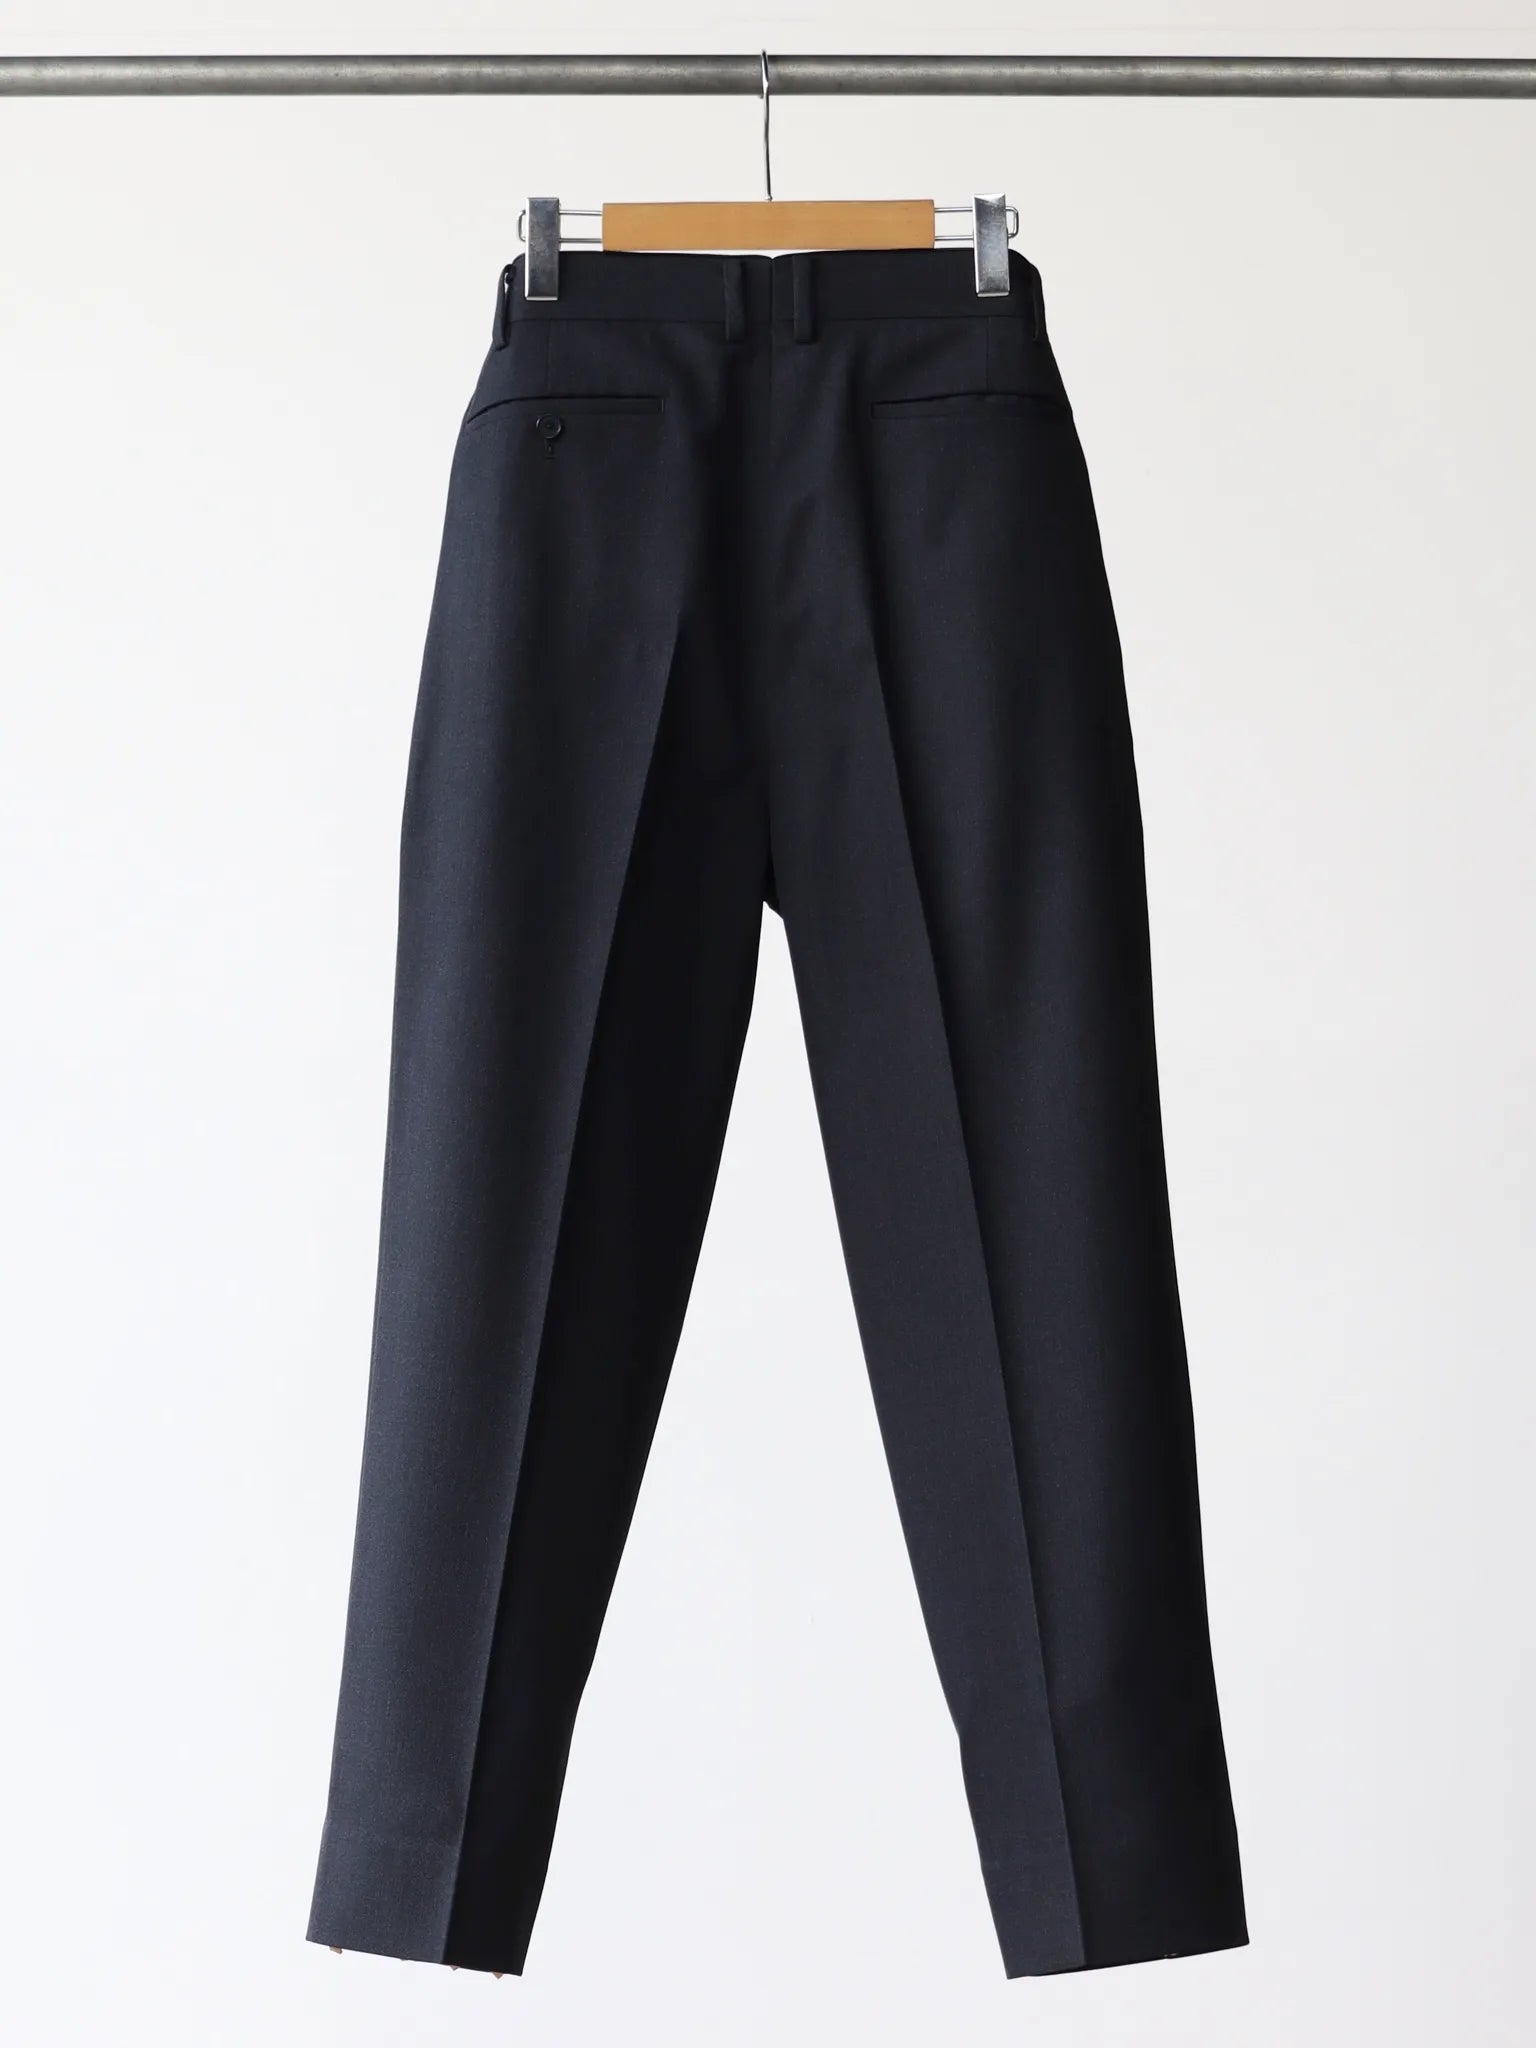 A.PRESSE | Covert Cloth Trousers CHARCOAL